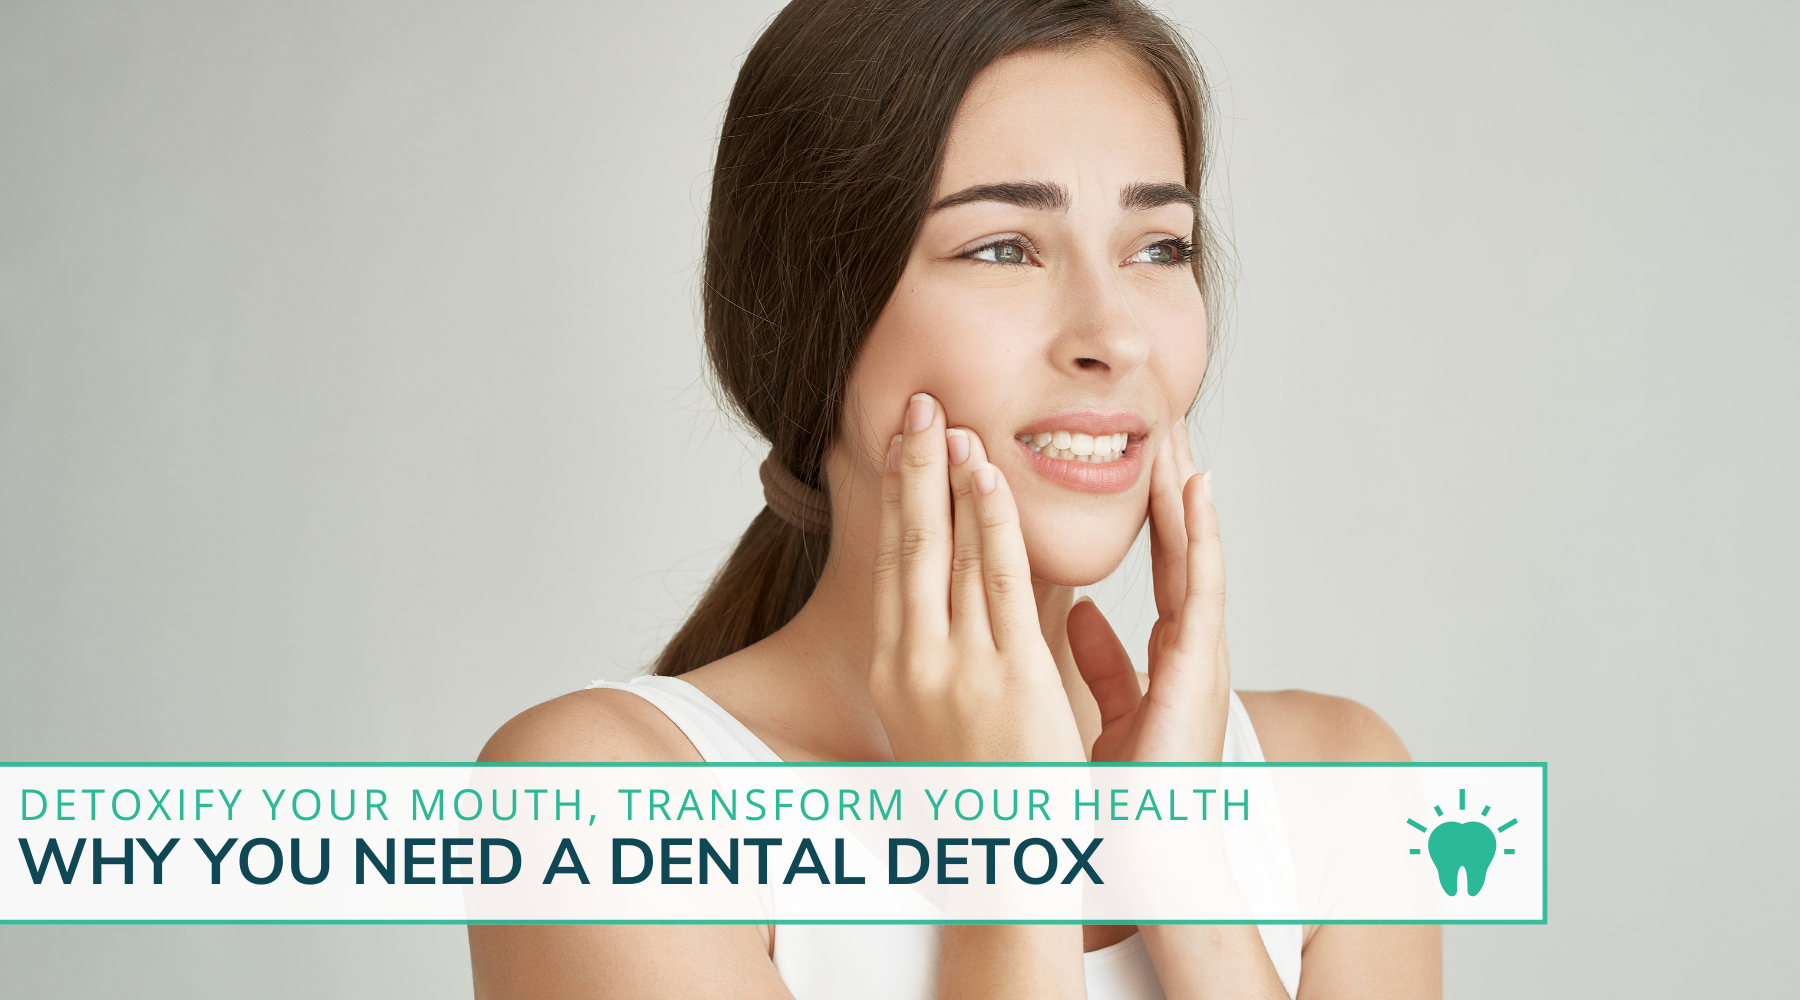 Detoxify Your Mouth, Transform Your Health - Why You Need A Dental Detox